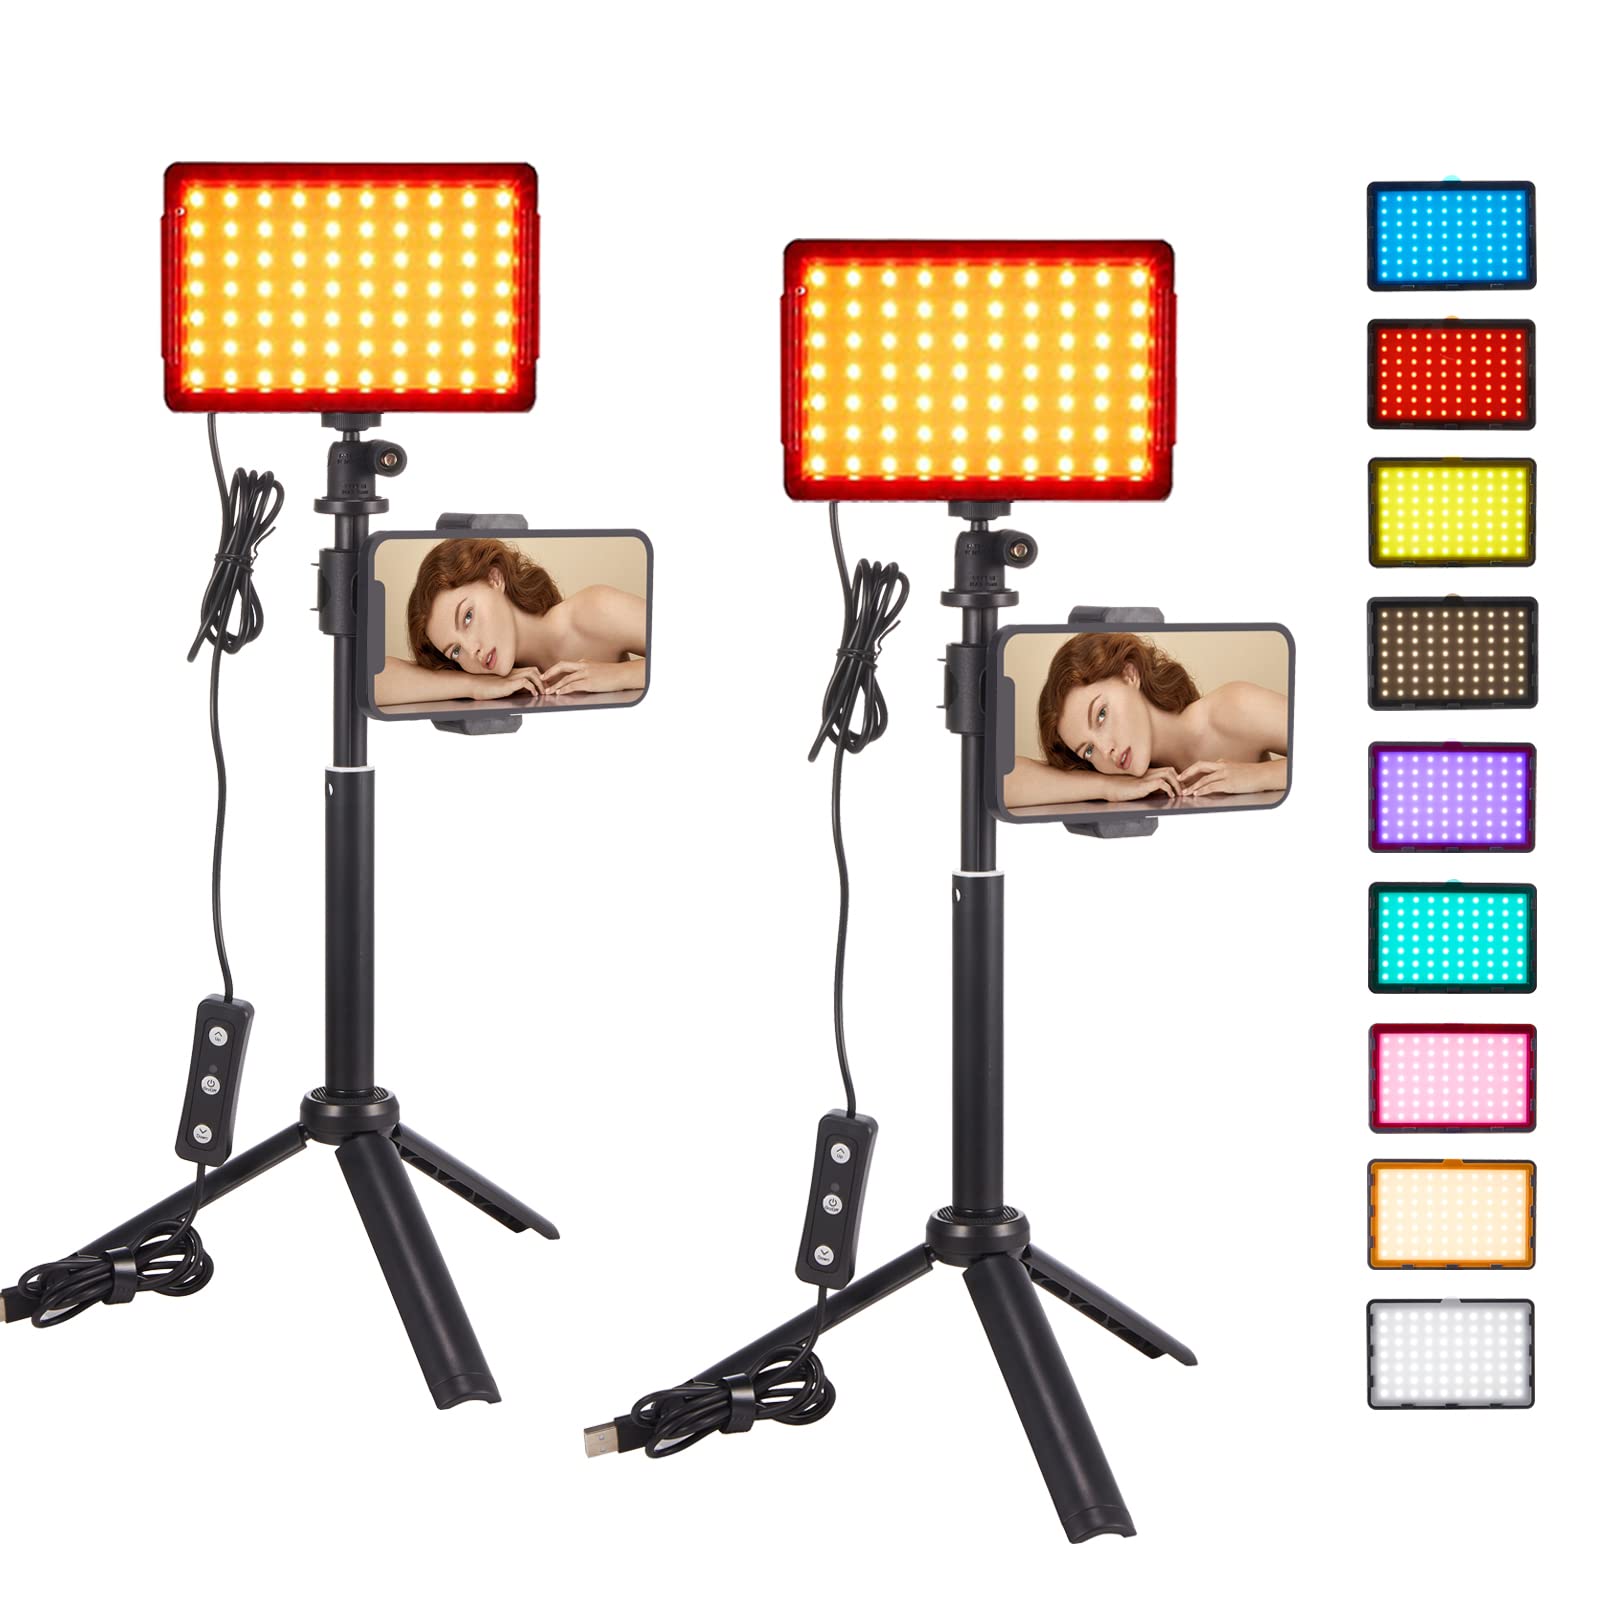 A-1 Lights and Light Stands